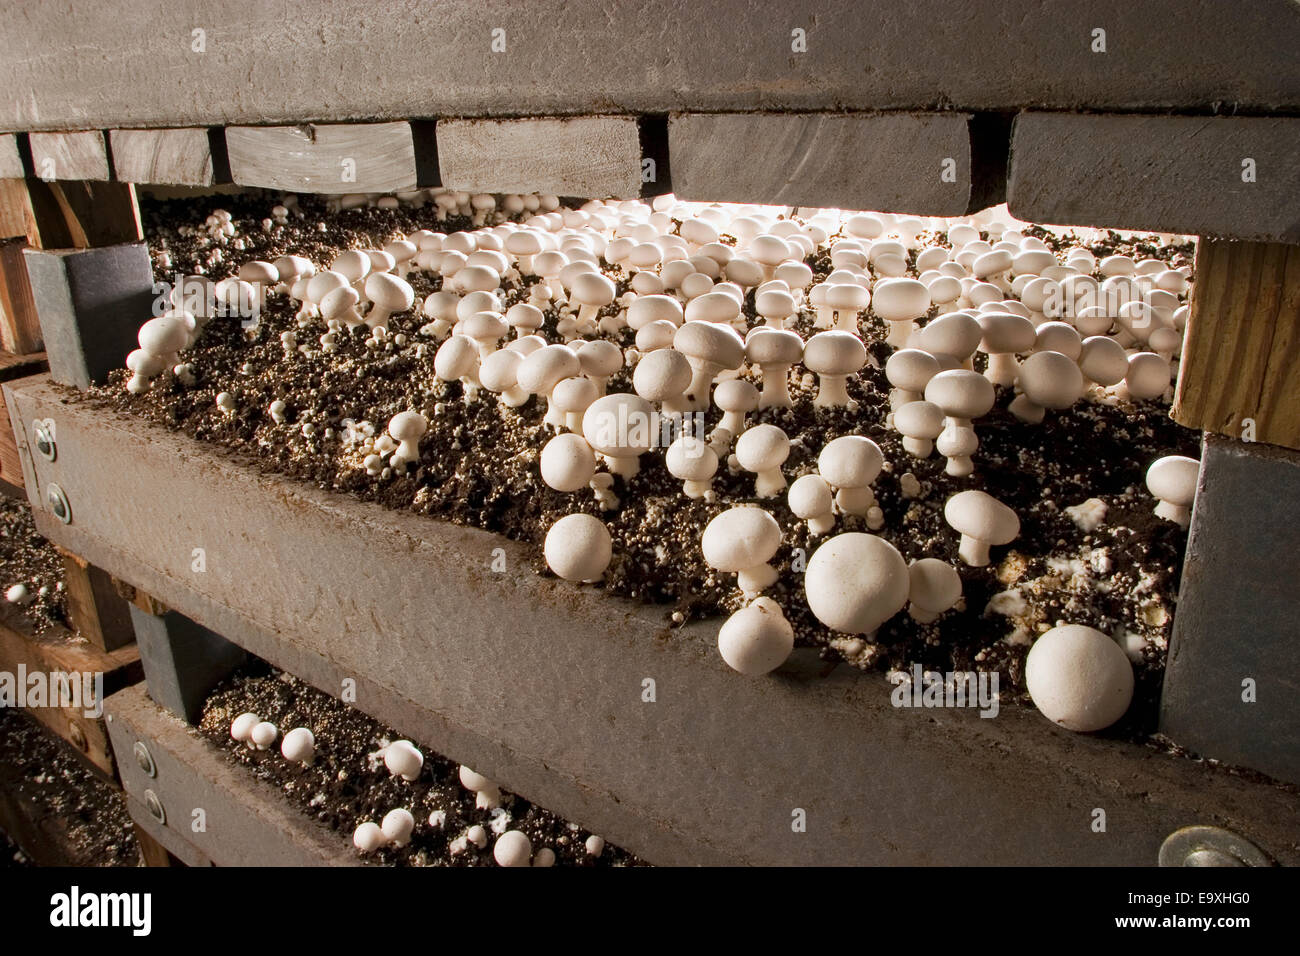 Agriculture - White button mushrooms growing in plastic based growing racks  / State College, Pennsylvania, USA Stock Photo - Alamy